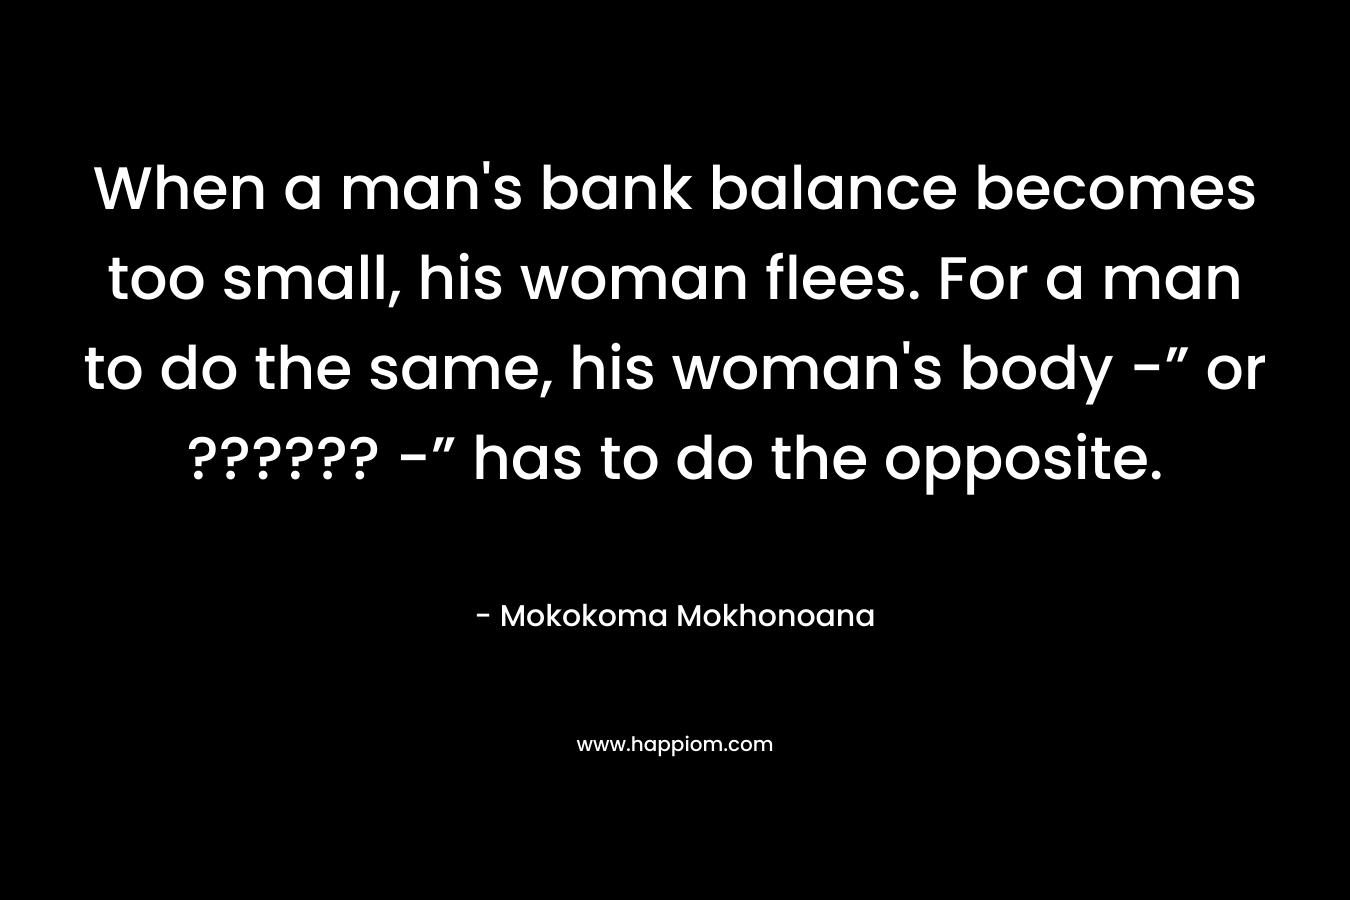 When a man's bank balance becomes too small, his woman flees. For a man to do the same, his woman's body -” or ?????? -” has to do the opposite.